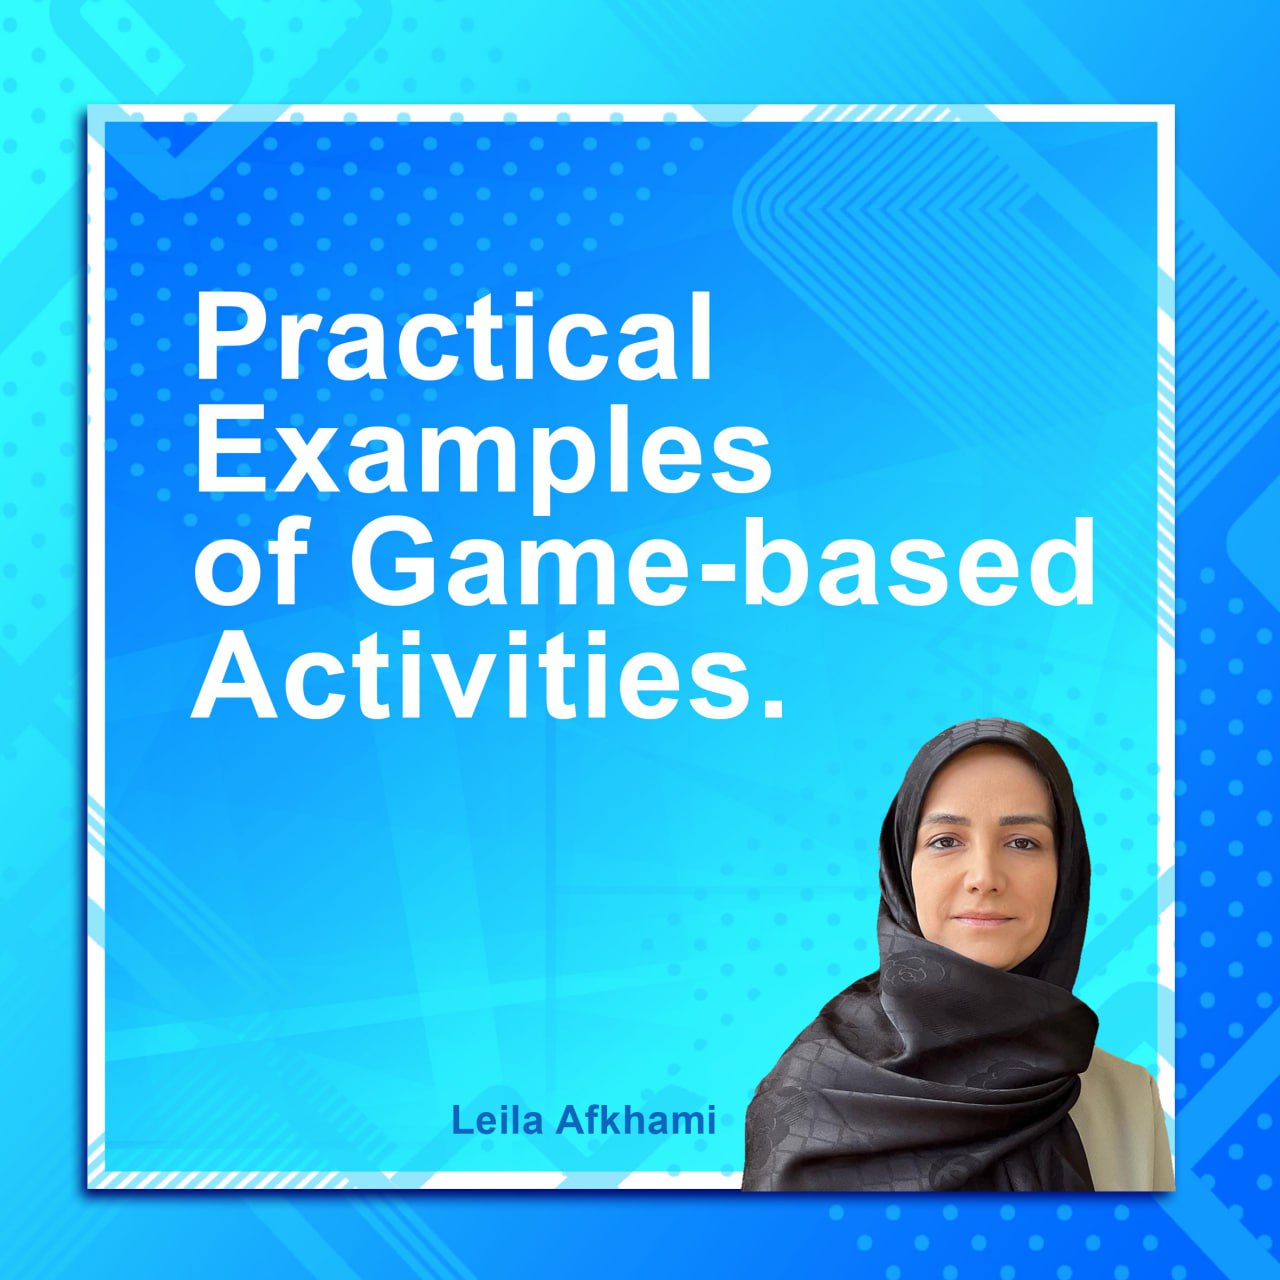 Practical Examples of Game-based Activities.